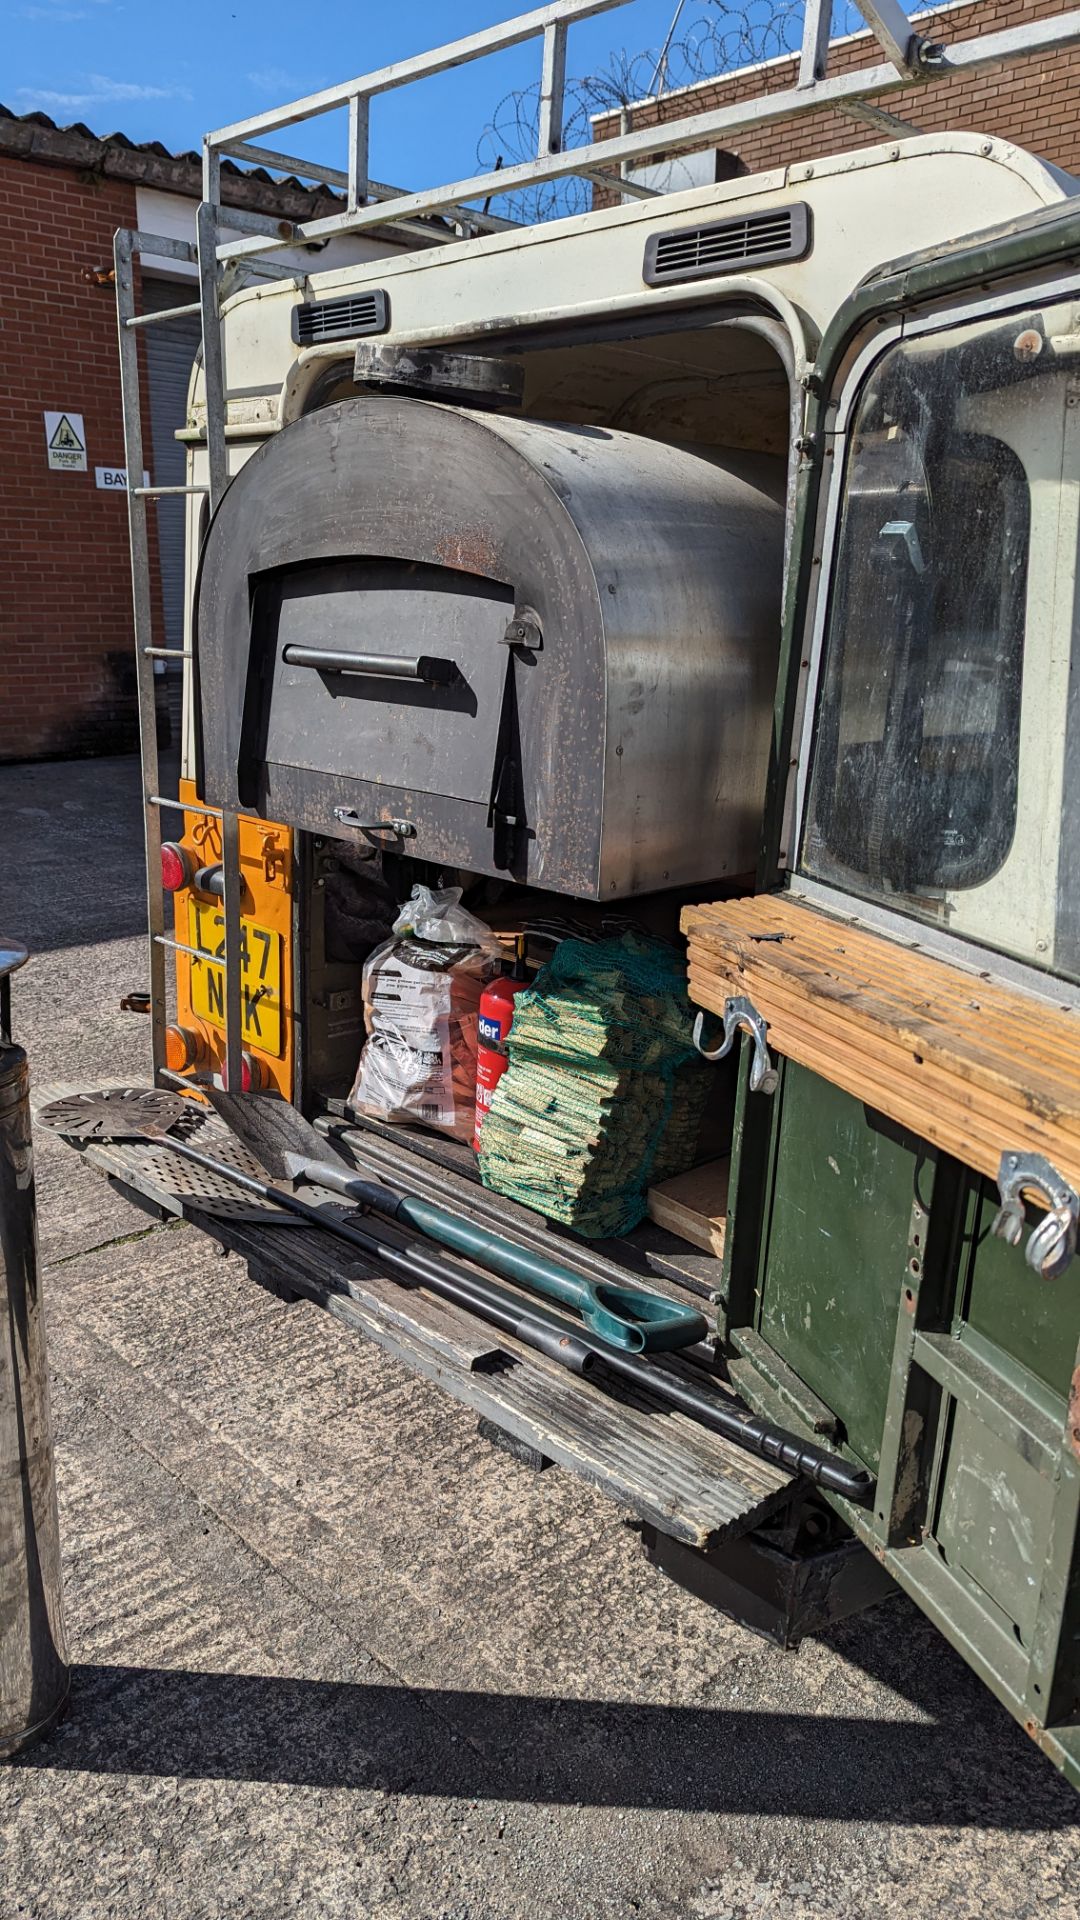 2003 Land Rover 110 Defender 4C Diesel with wood fired pizza oven - Image 23 of 48